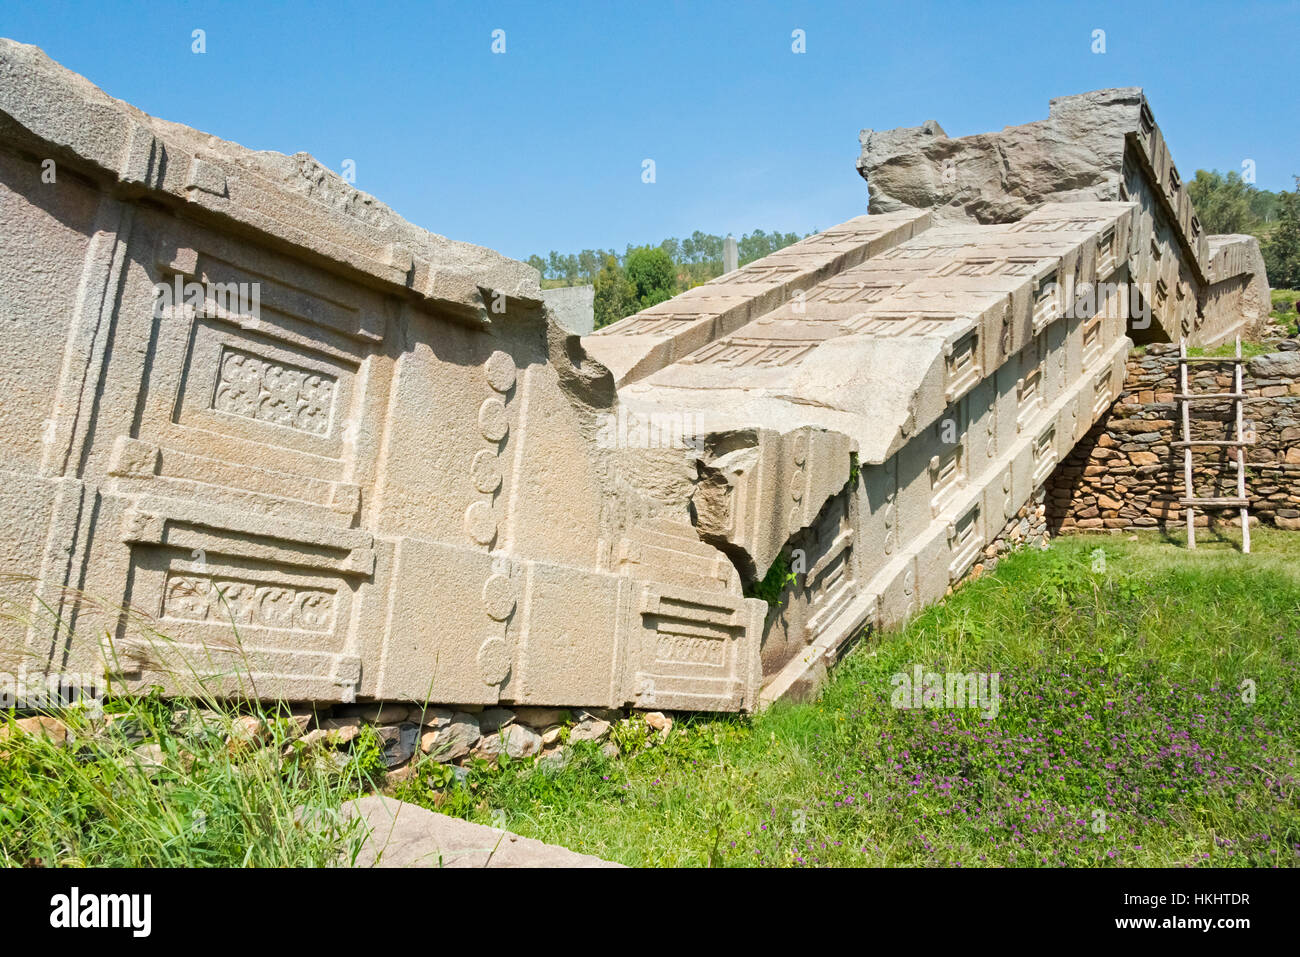 The largest Aksumite stele, broken where it fell, the ruins of the ancient city of Aksum, UNESCO World Heritage site, Ethiopia Stock Photo